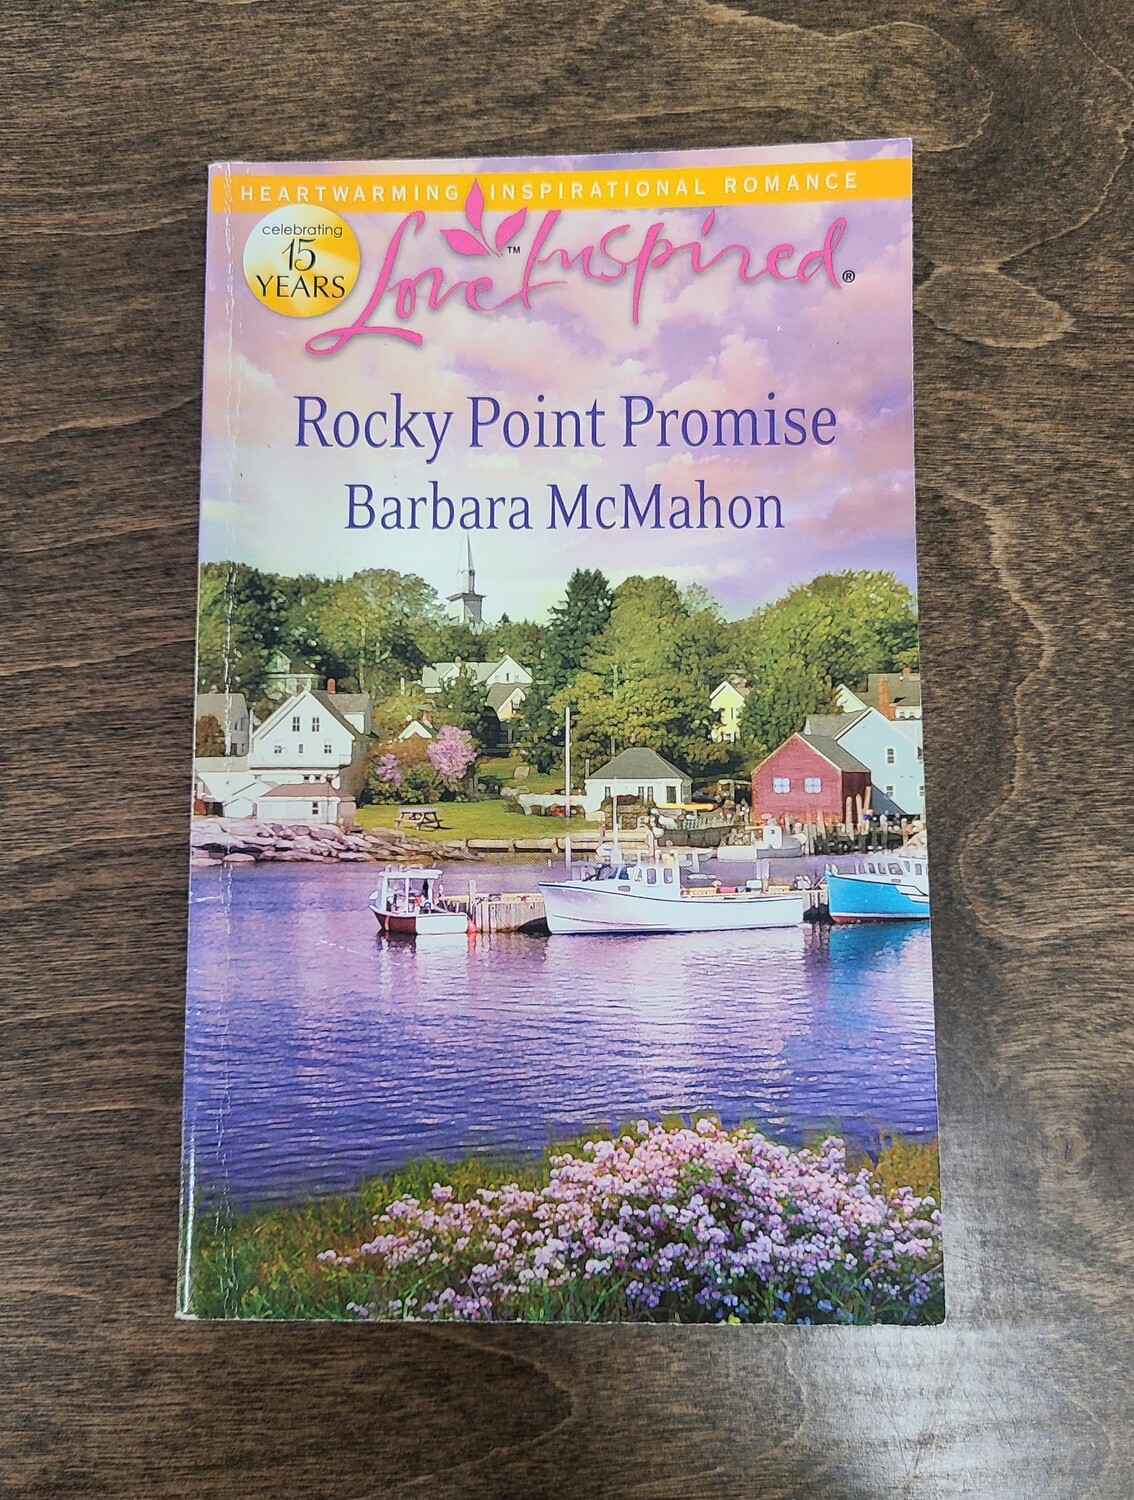 Rocky Point Promise by Barbara McMahon